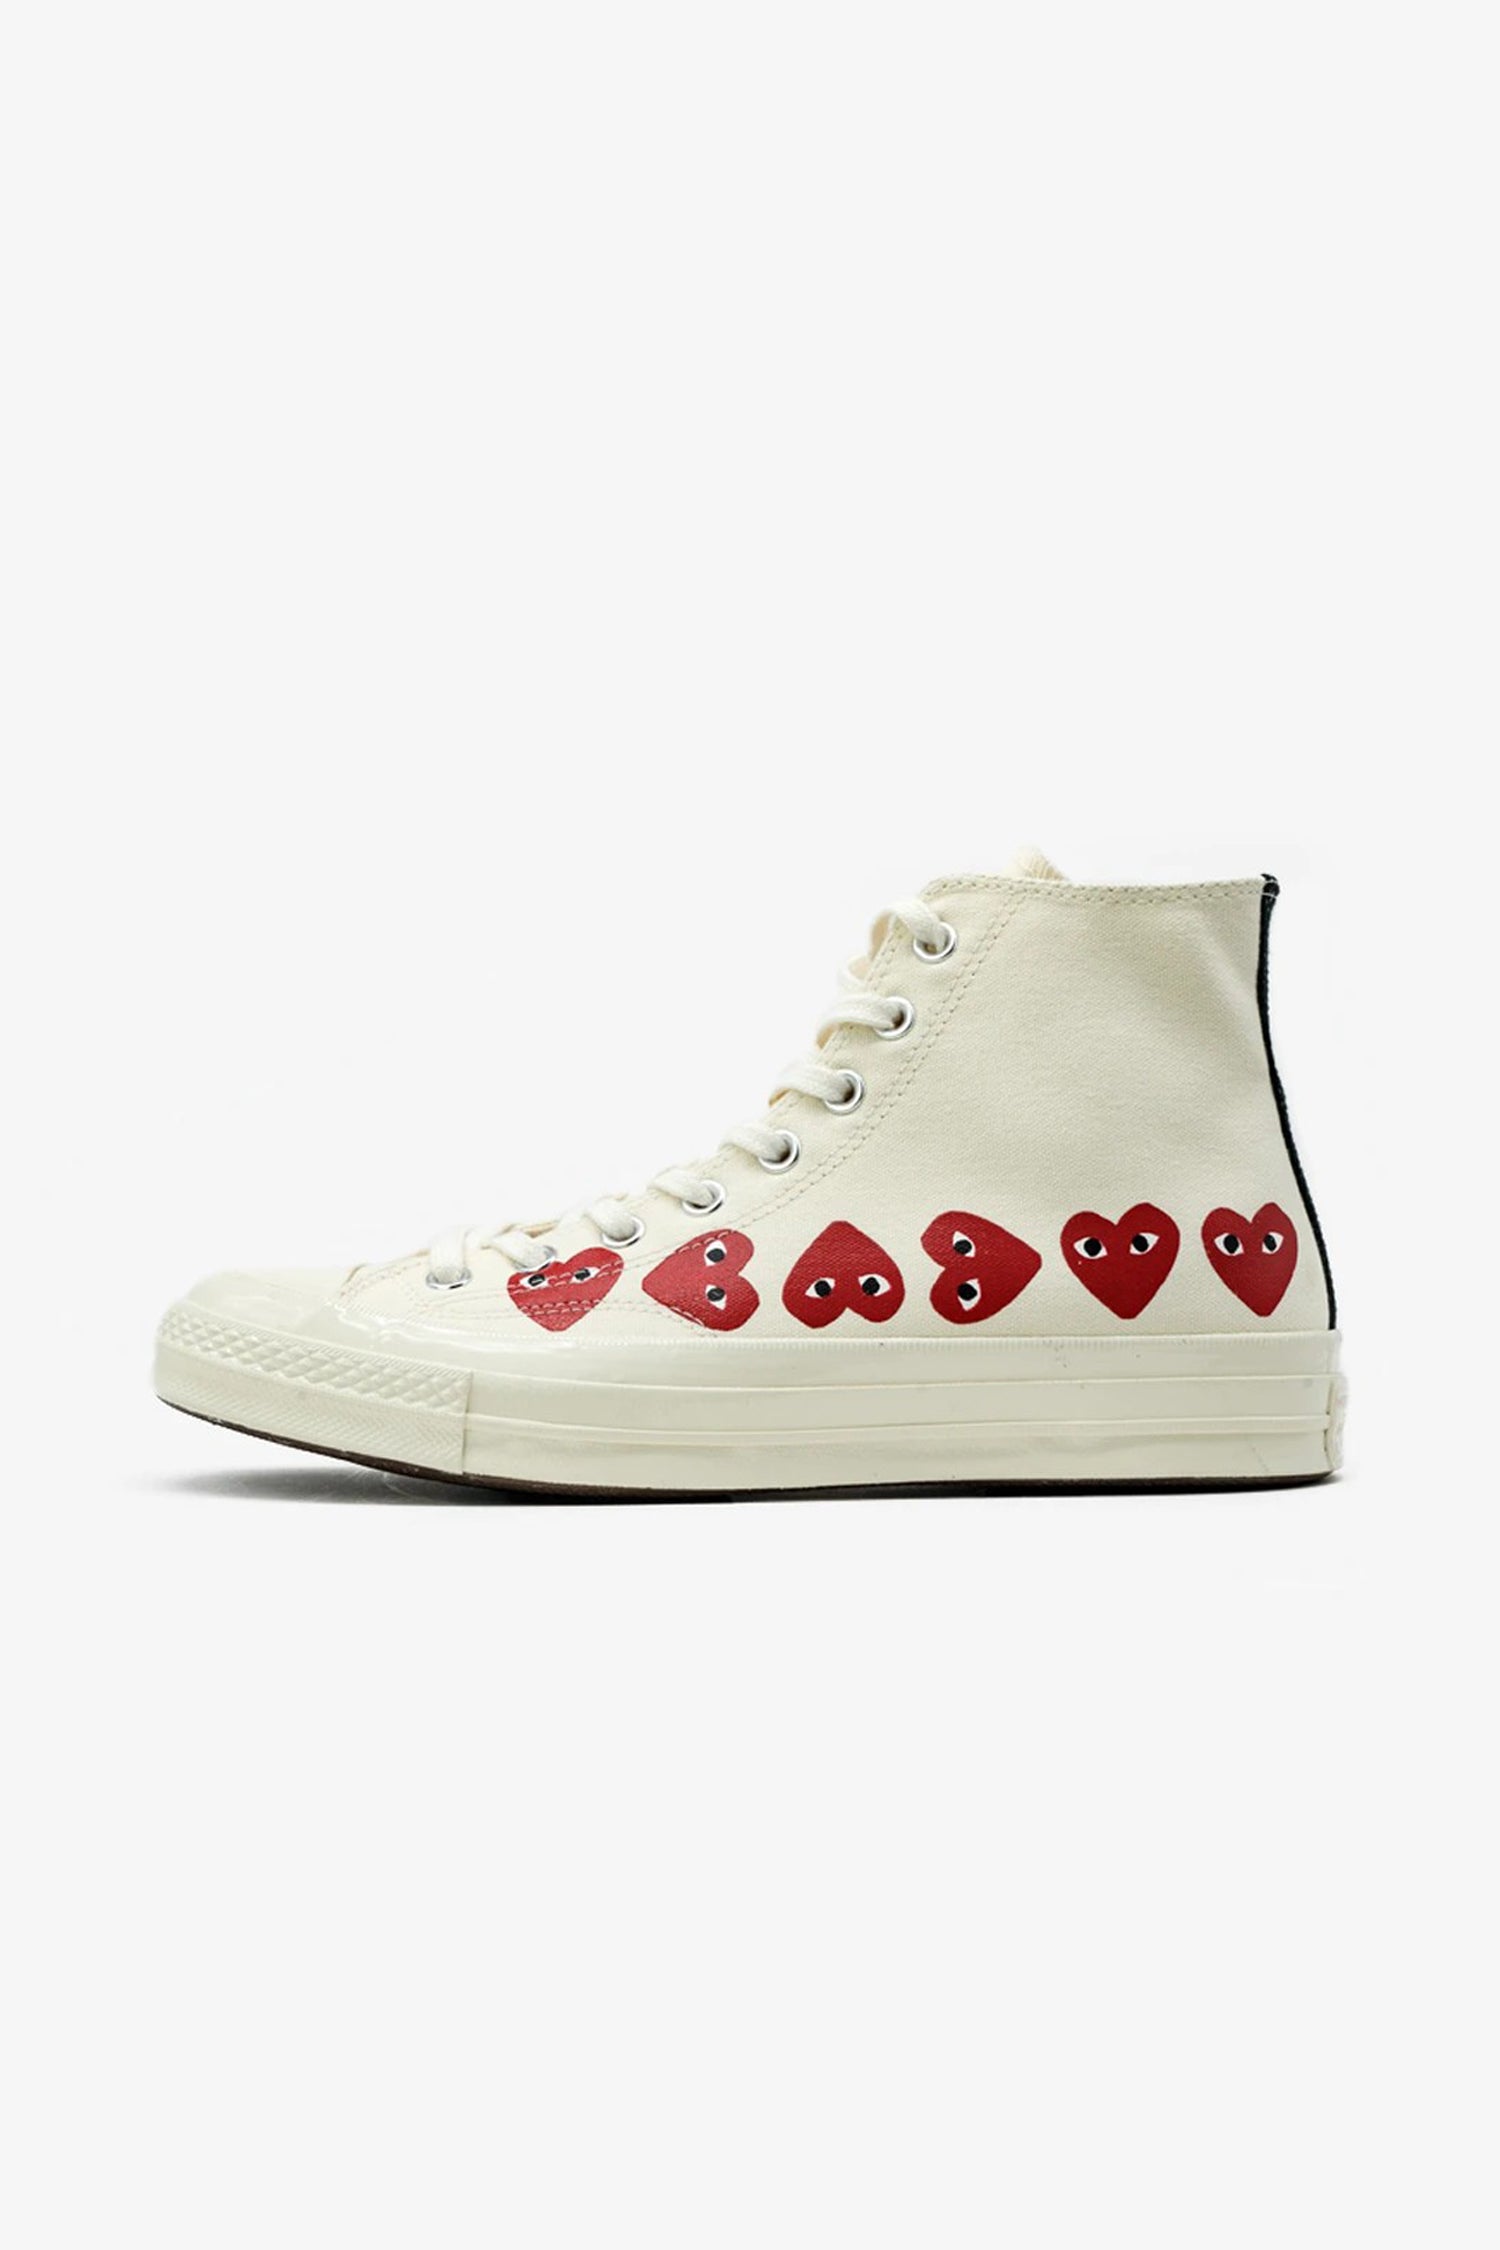 converse with the red heart